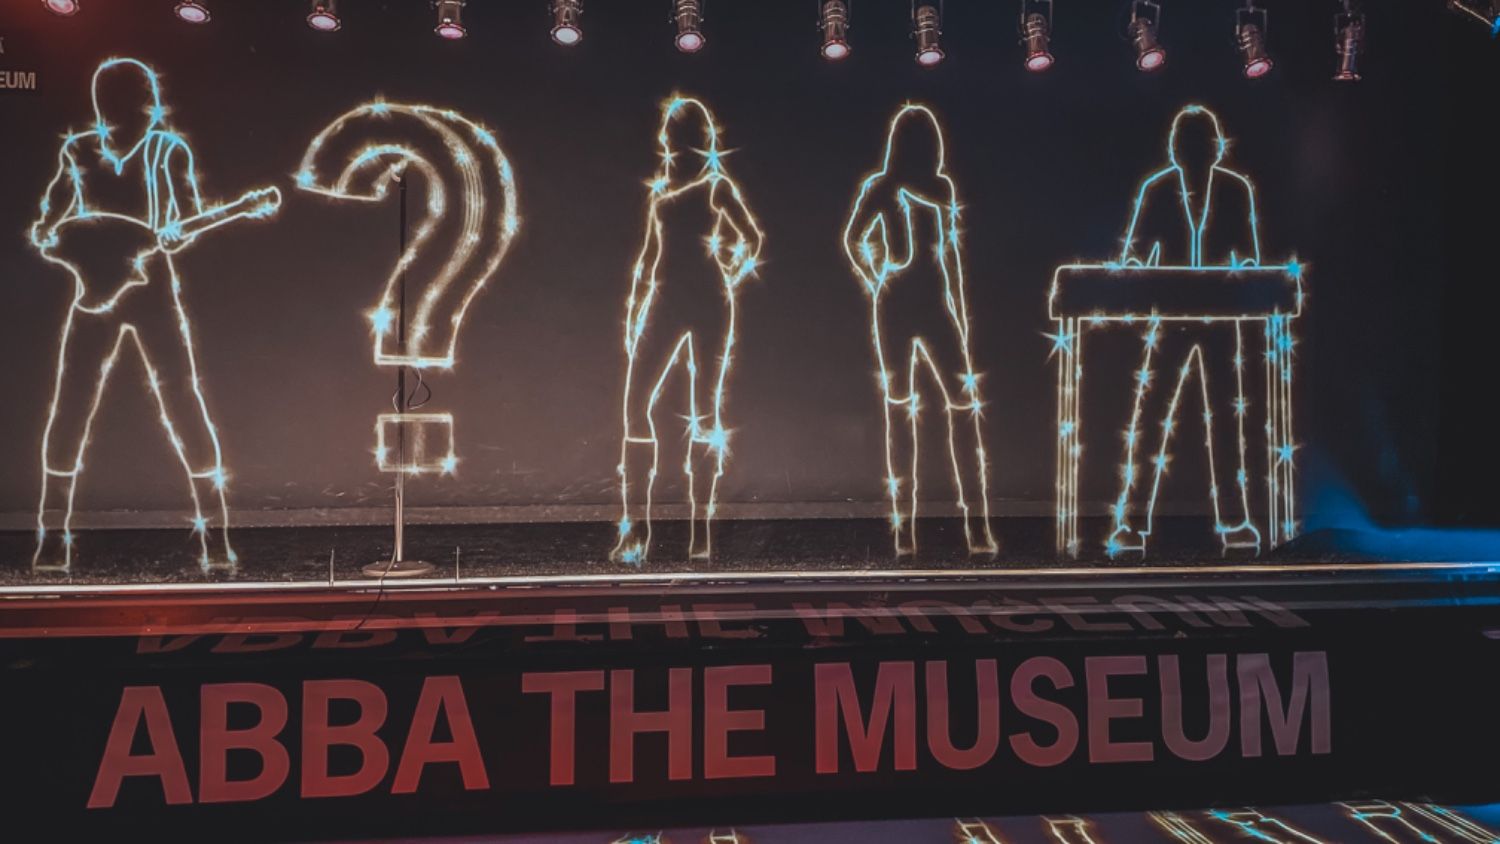 Abba the museum